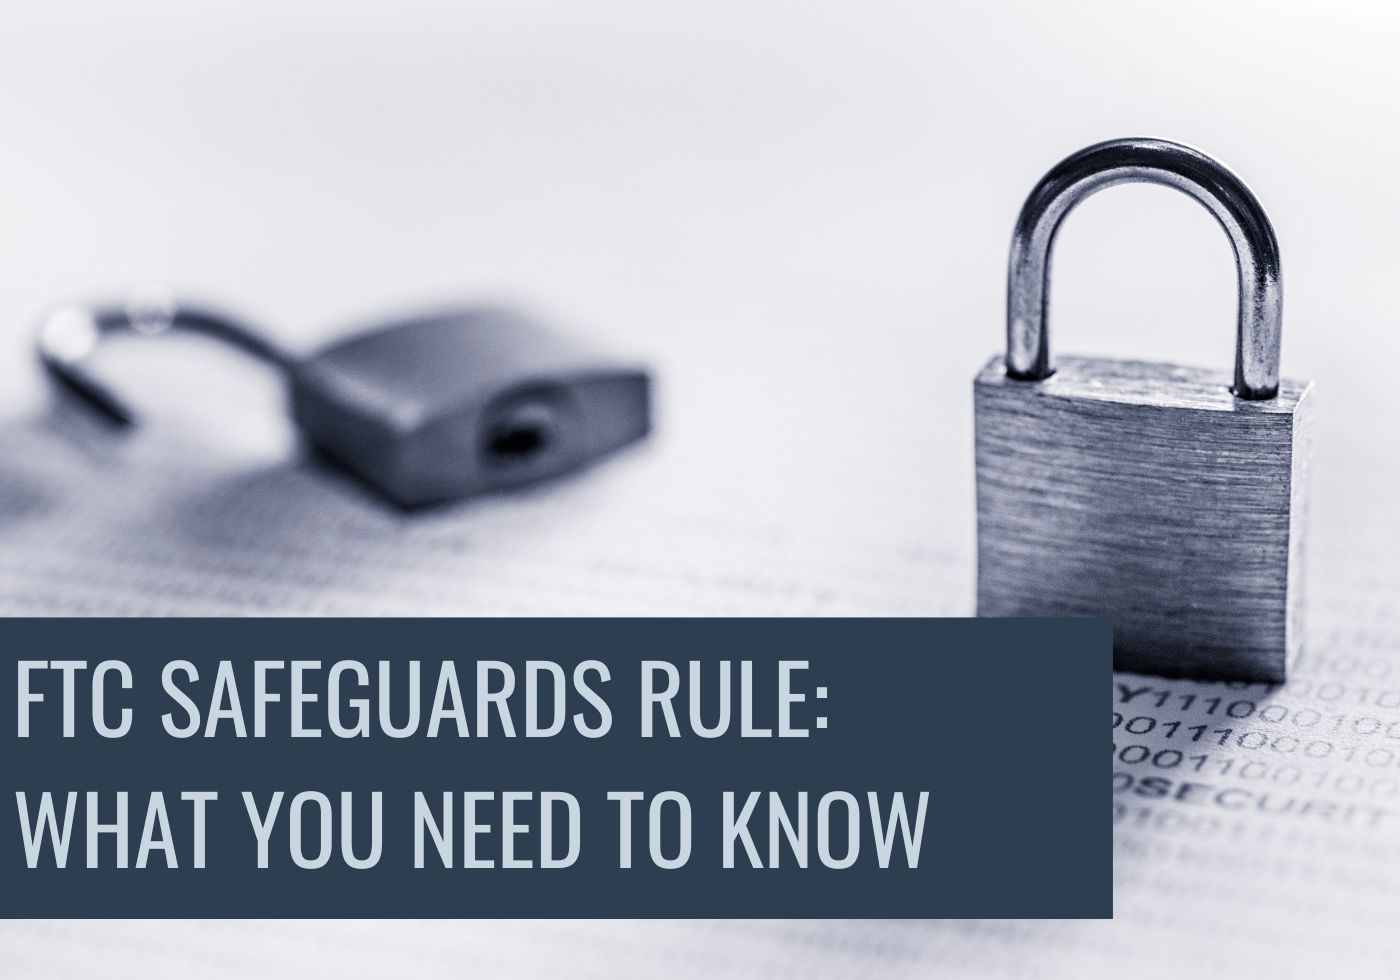 FTC Safeguards Rule - What You Need to Know